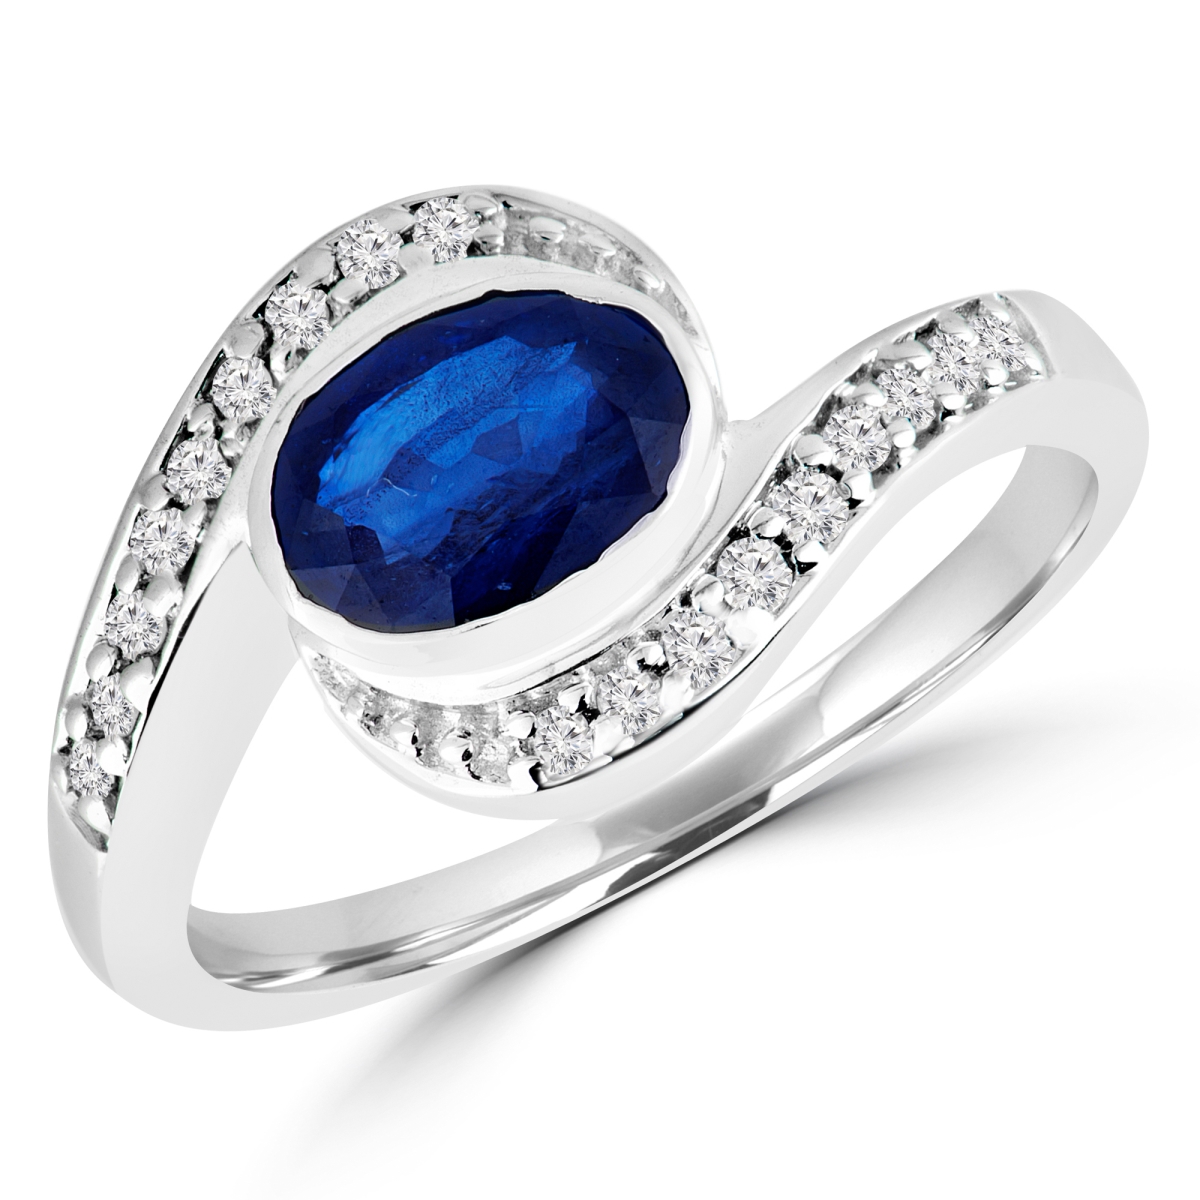 Picture of Majesty Diamonds MDR170020-3 1.1 CTW Oval Blue Sapphire Bypass Cocktail Ring in 14K White Gold - 3